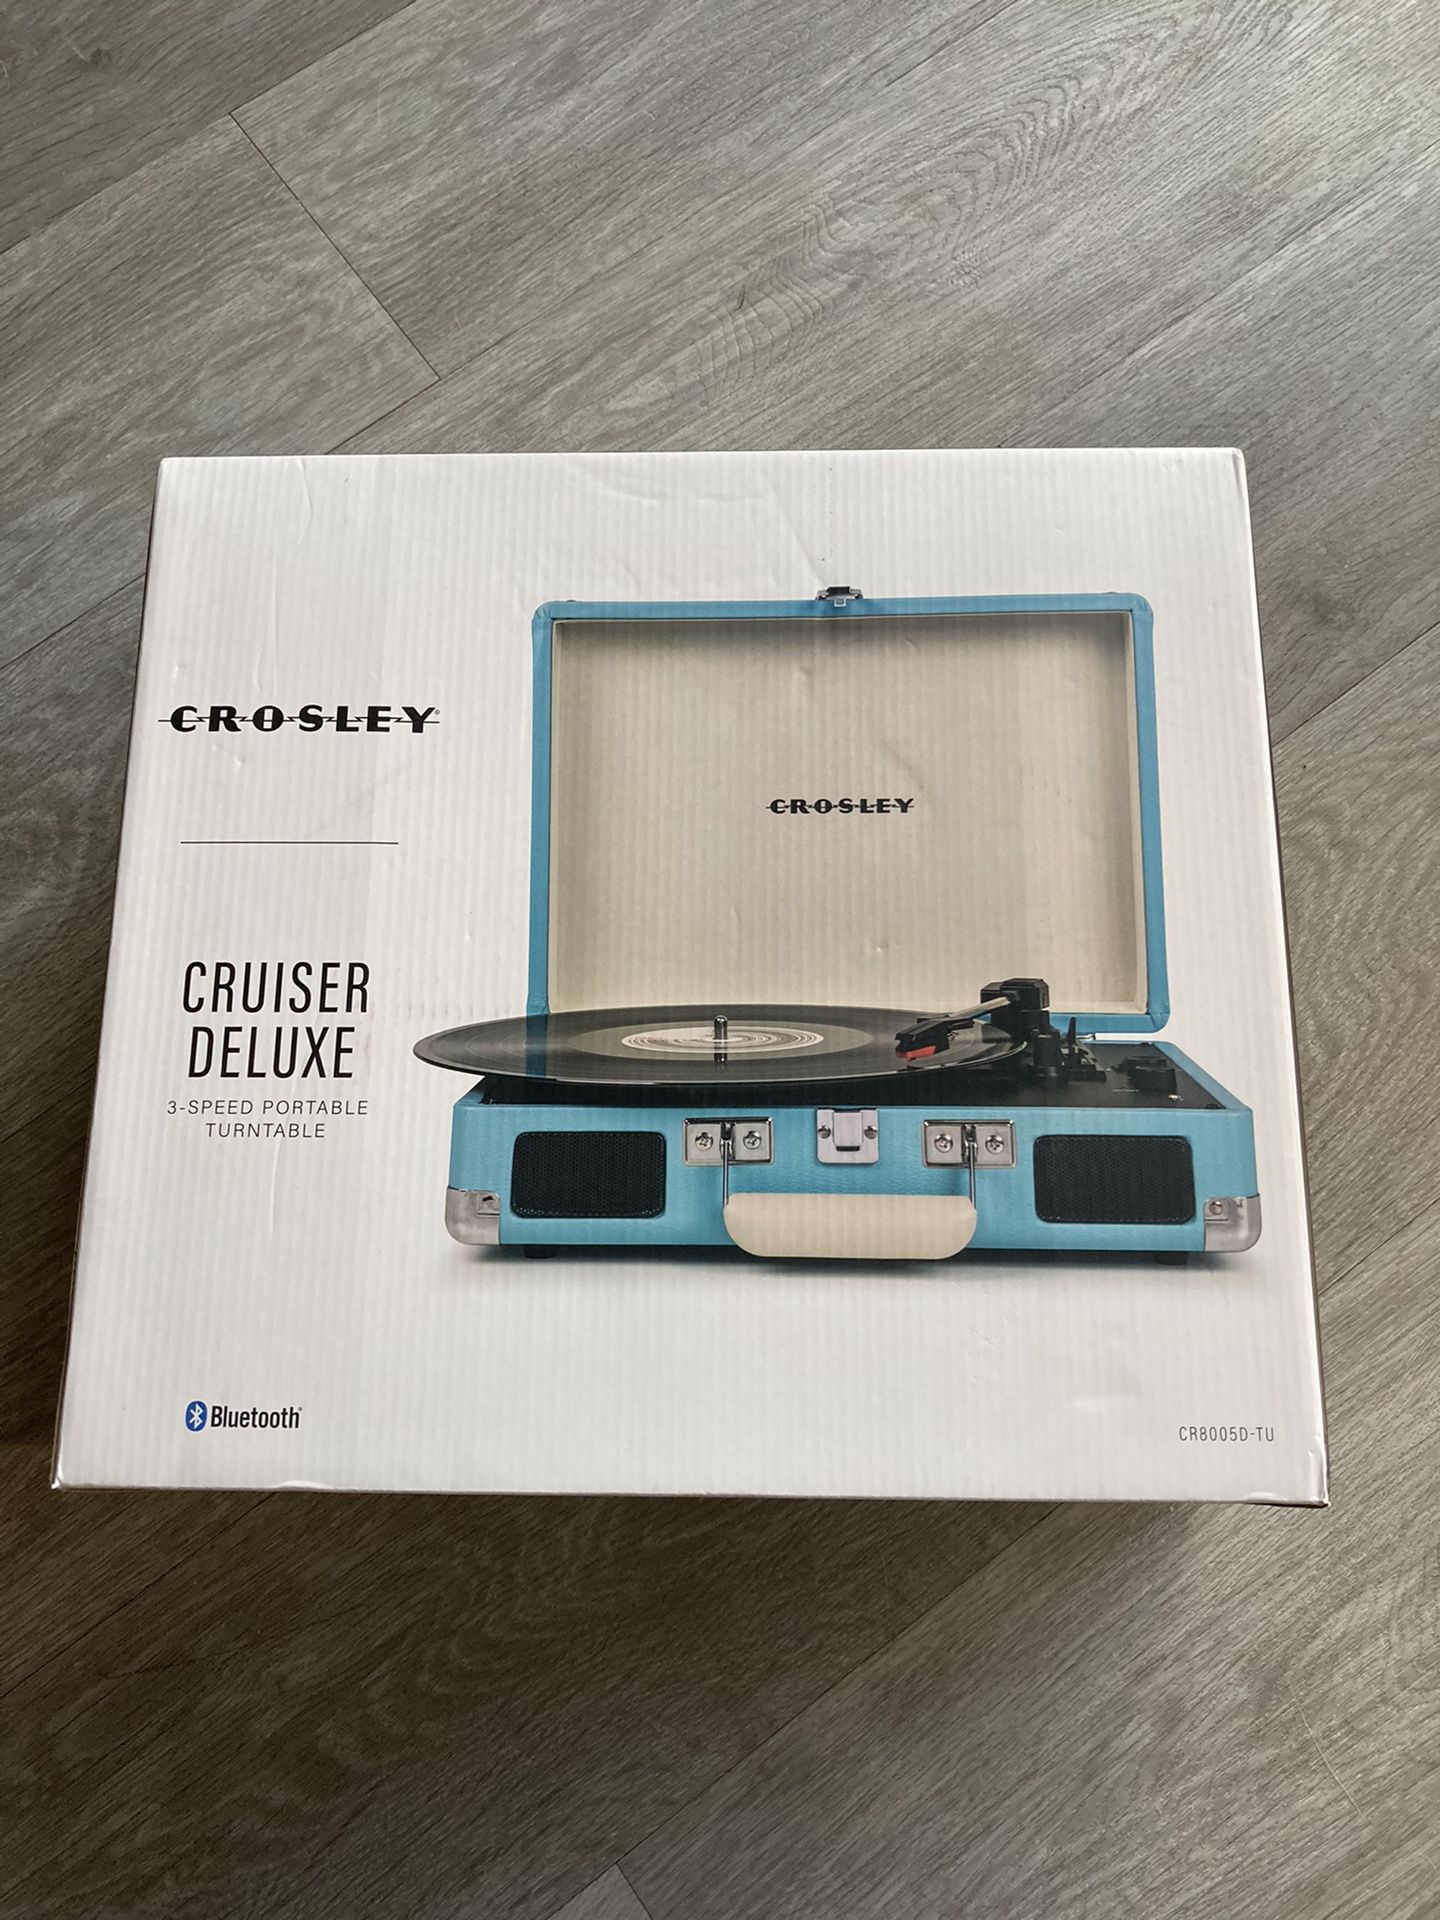 Record Player- Crosley CR8005D-TU Cruiser Deluxe Portable 3-Speed Turntable with Bluetooth